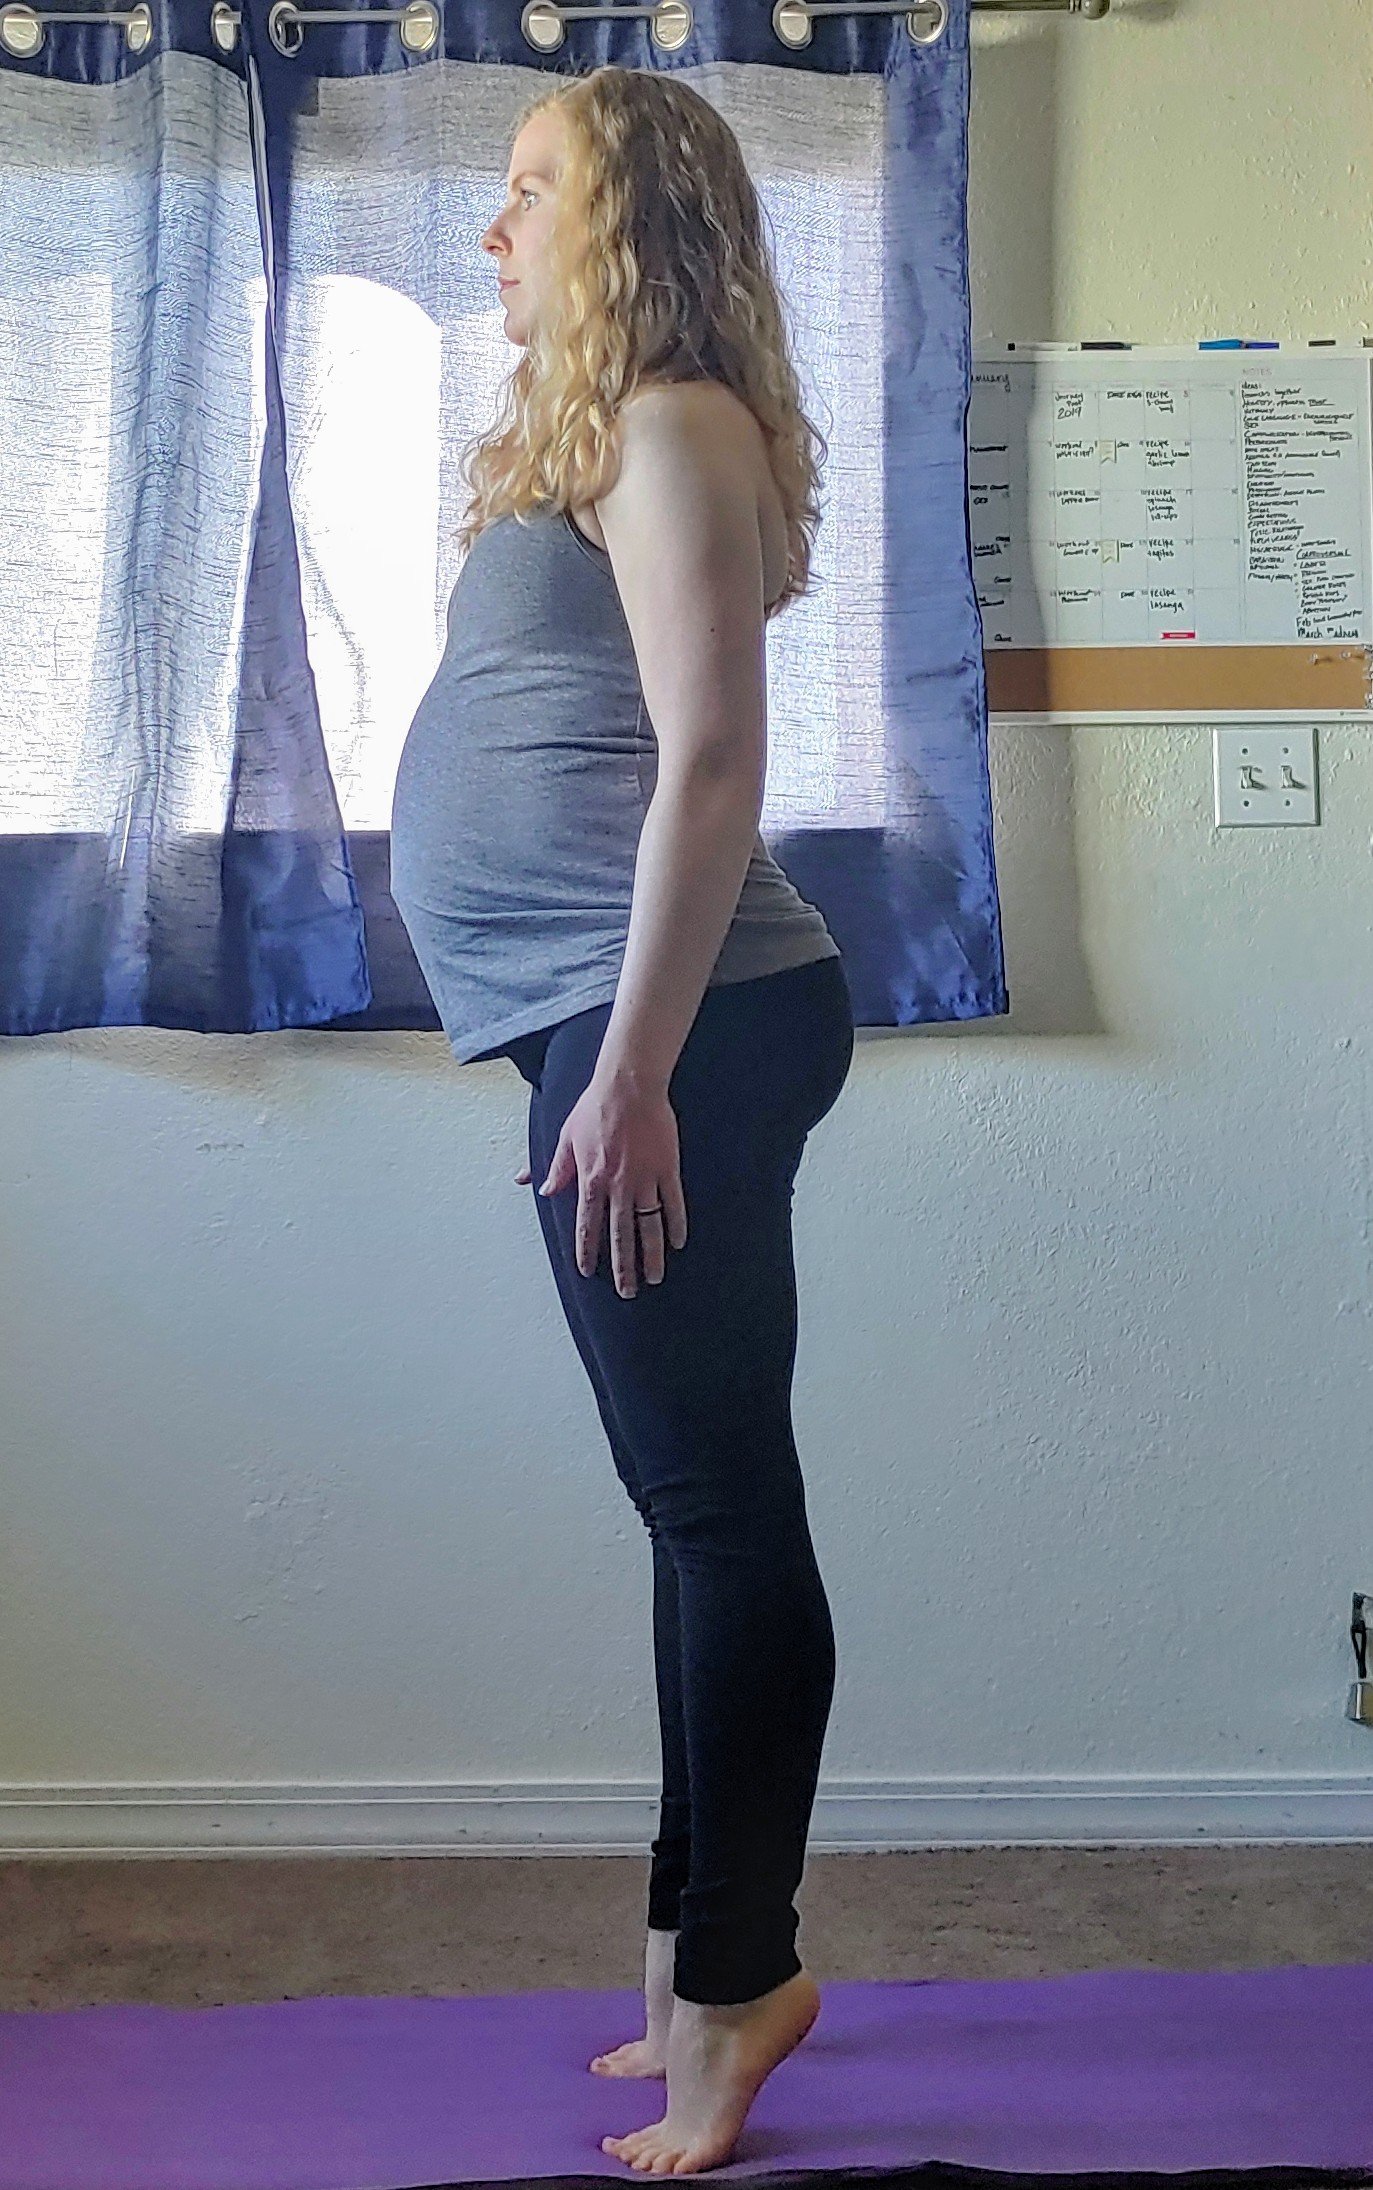 Full Body Workout That's Safe for Pregnancy - One Fit Mamma